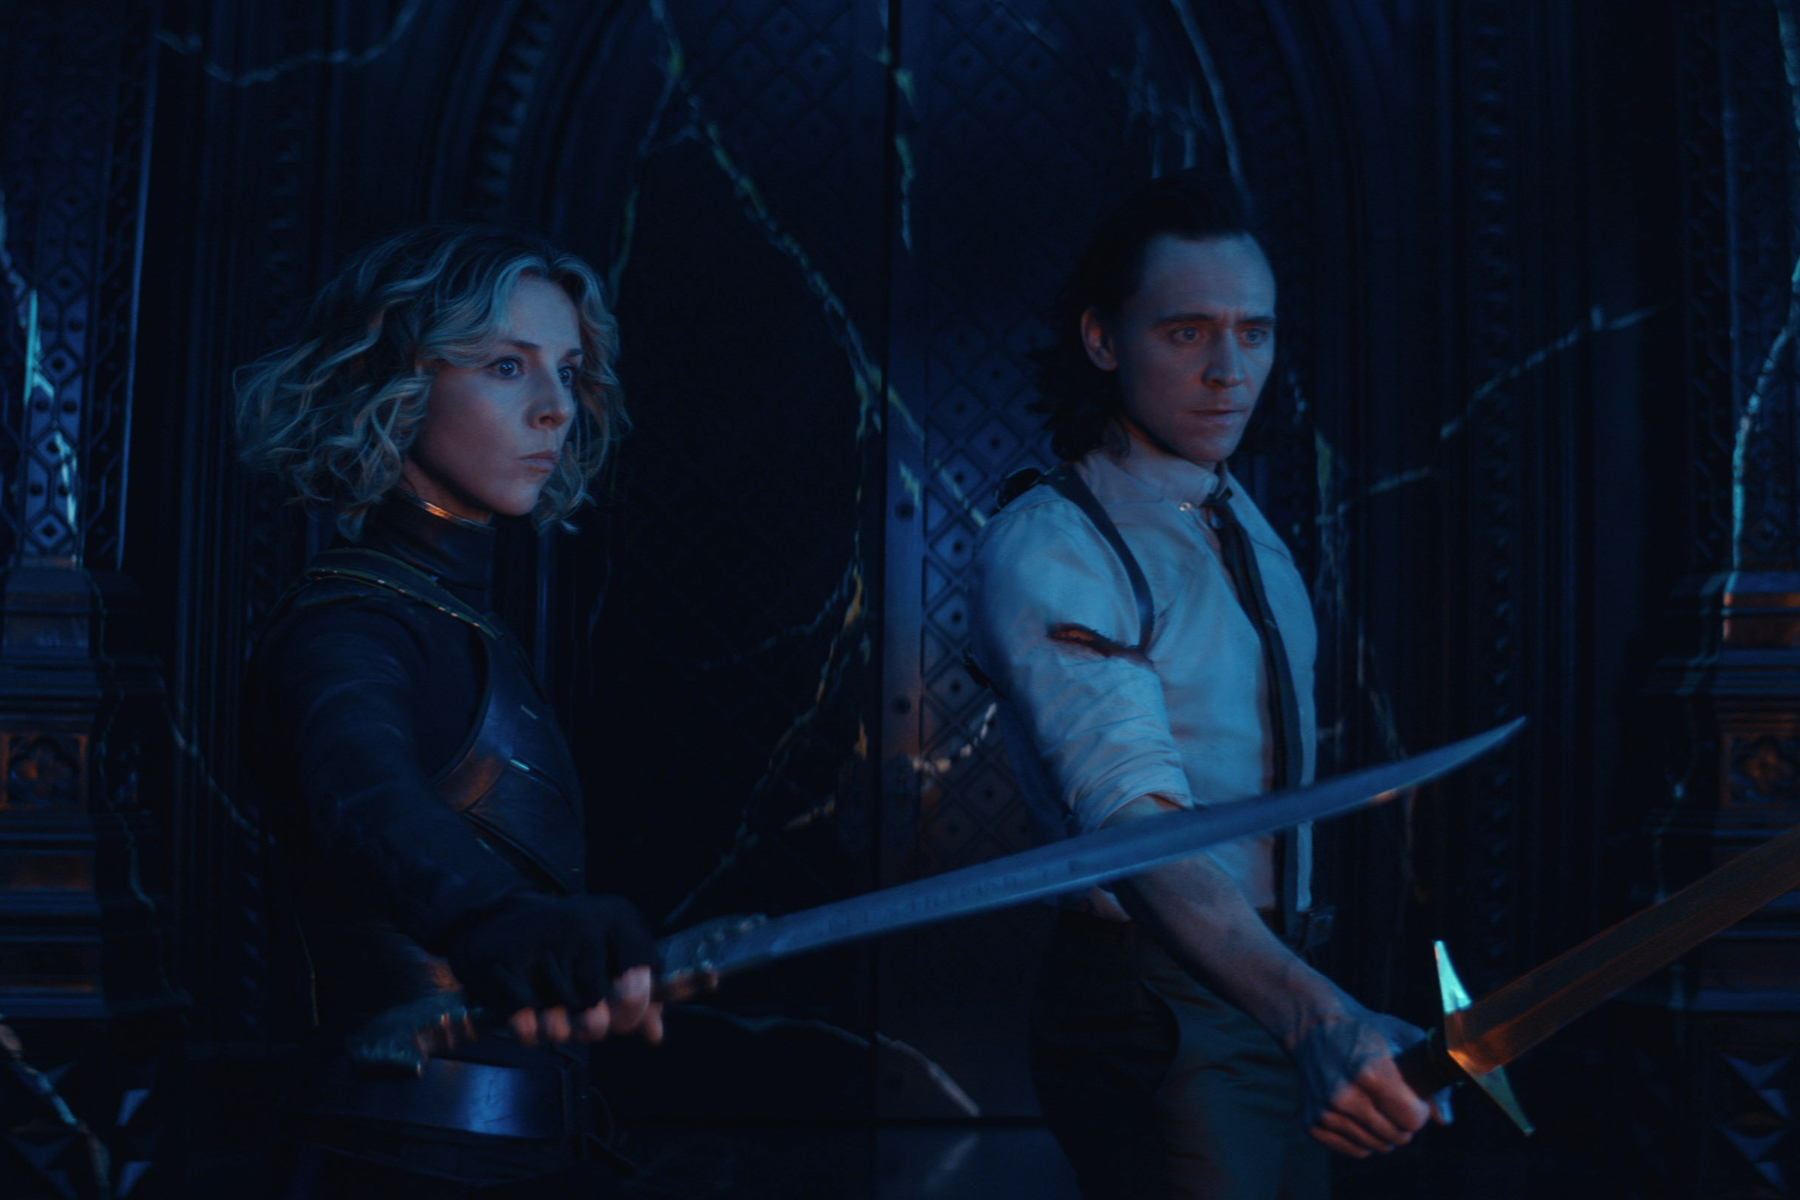 (L-R): Sylvie (Sophia Di Martino) and Loki (Tom Hiddleston) in Marvel Studios' LOKI, exclusively on Disney+. Photo courtesy of Marvel Studios. ©Marvel Studios 2021. All Rights Reserved.